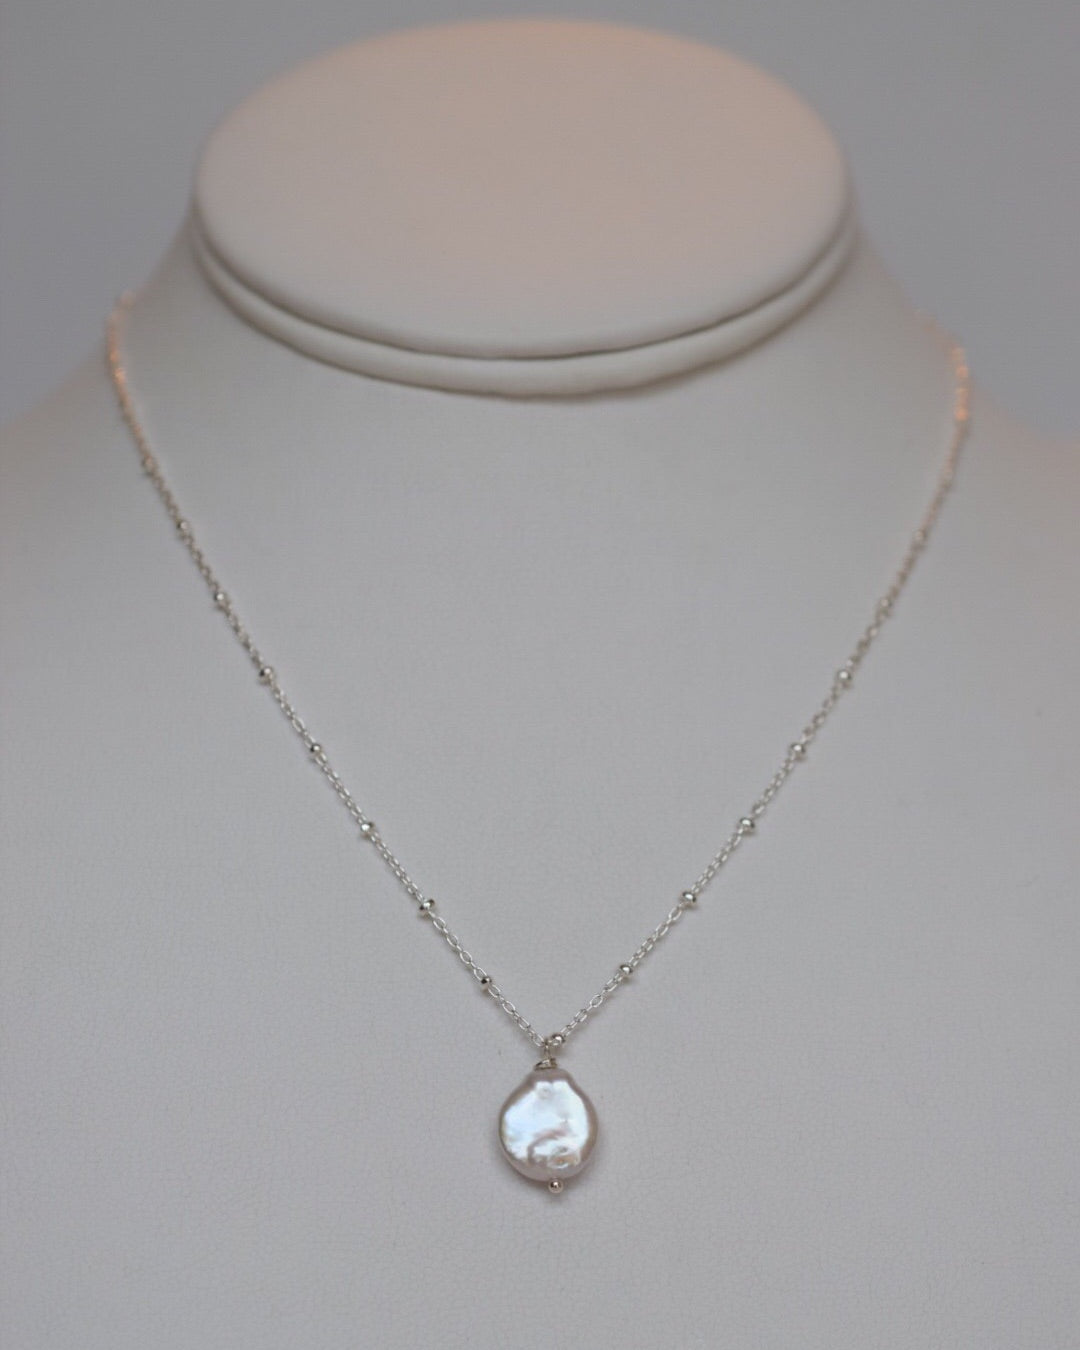 Dainty Coin Pearl Necklace - MILK VELVET PEARLS